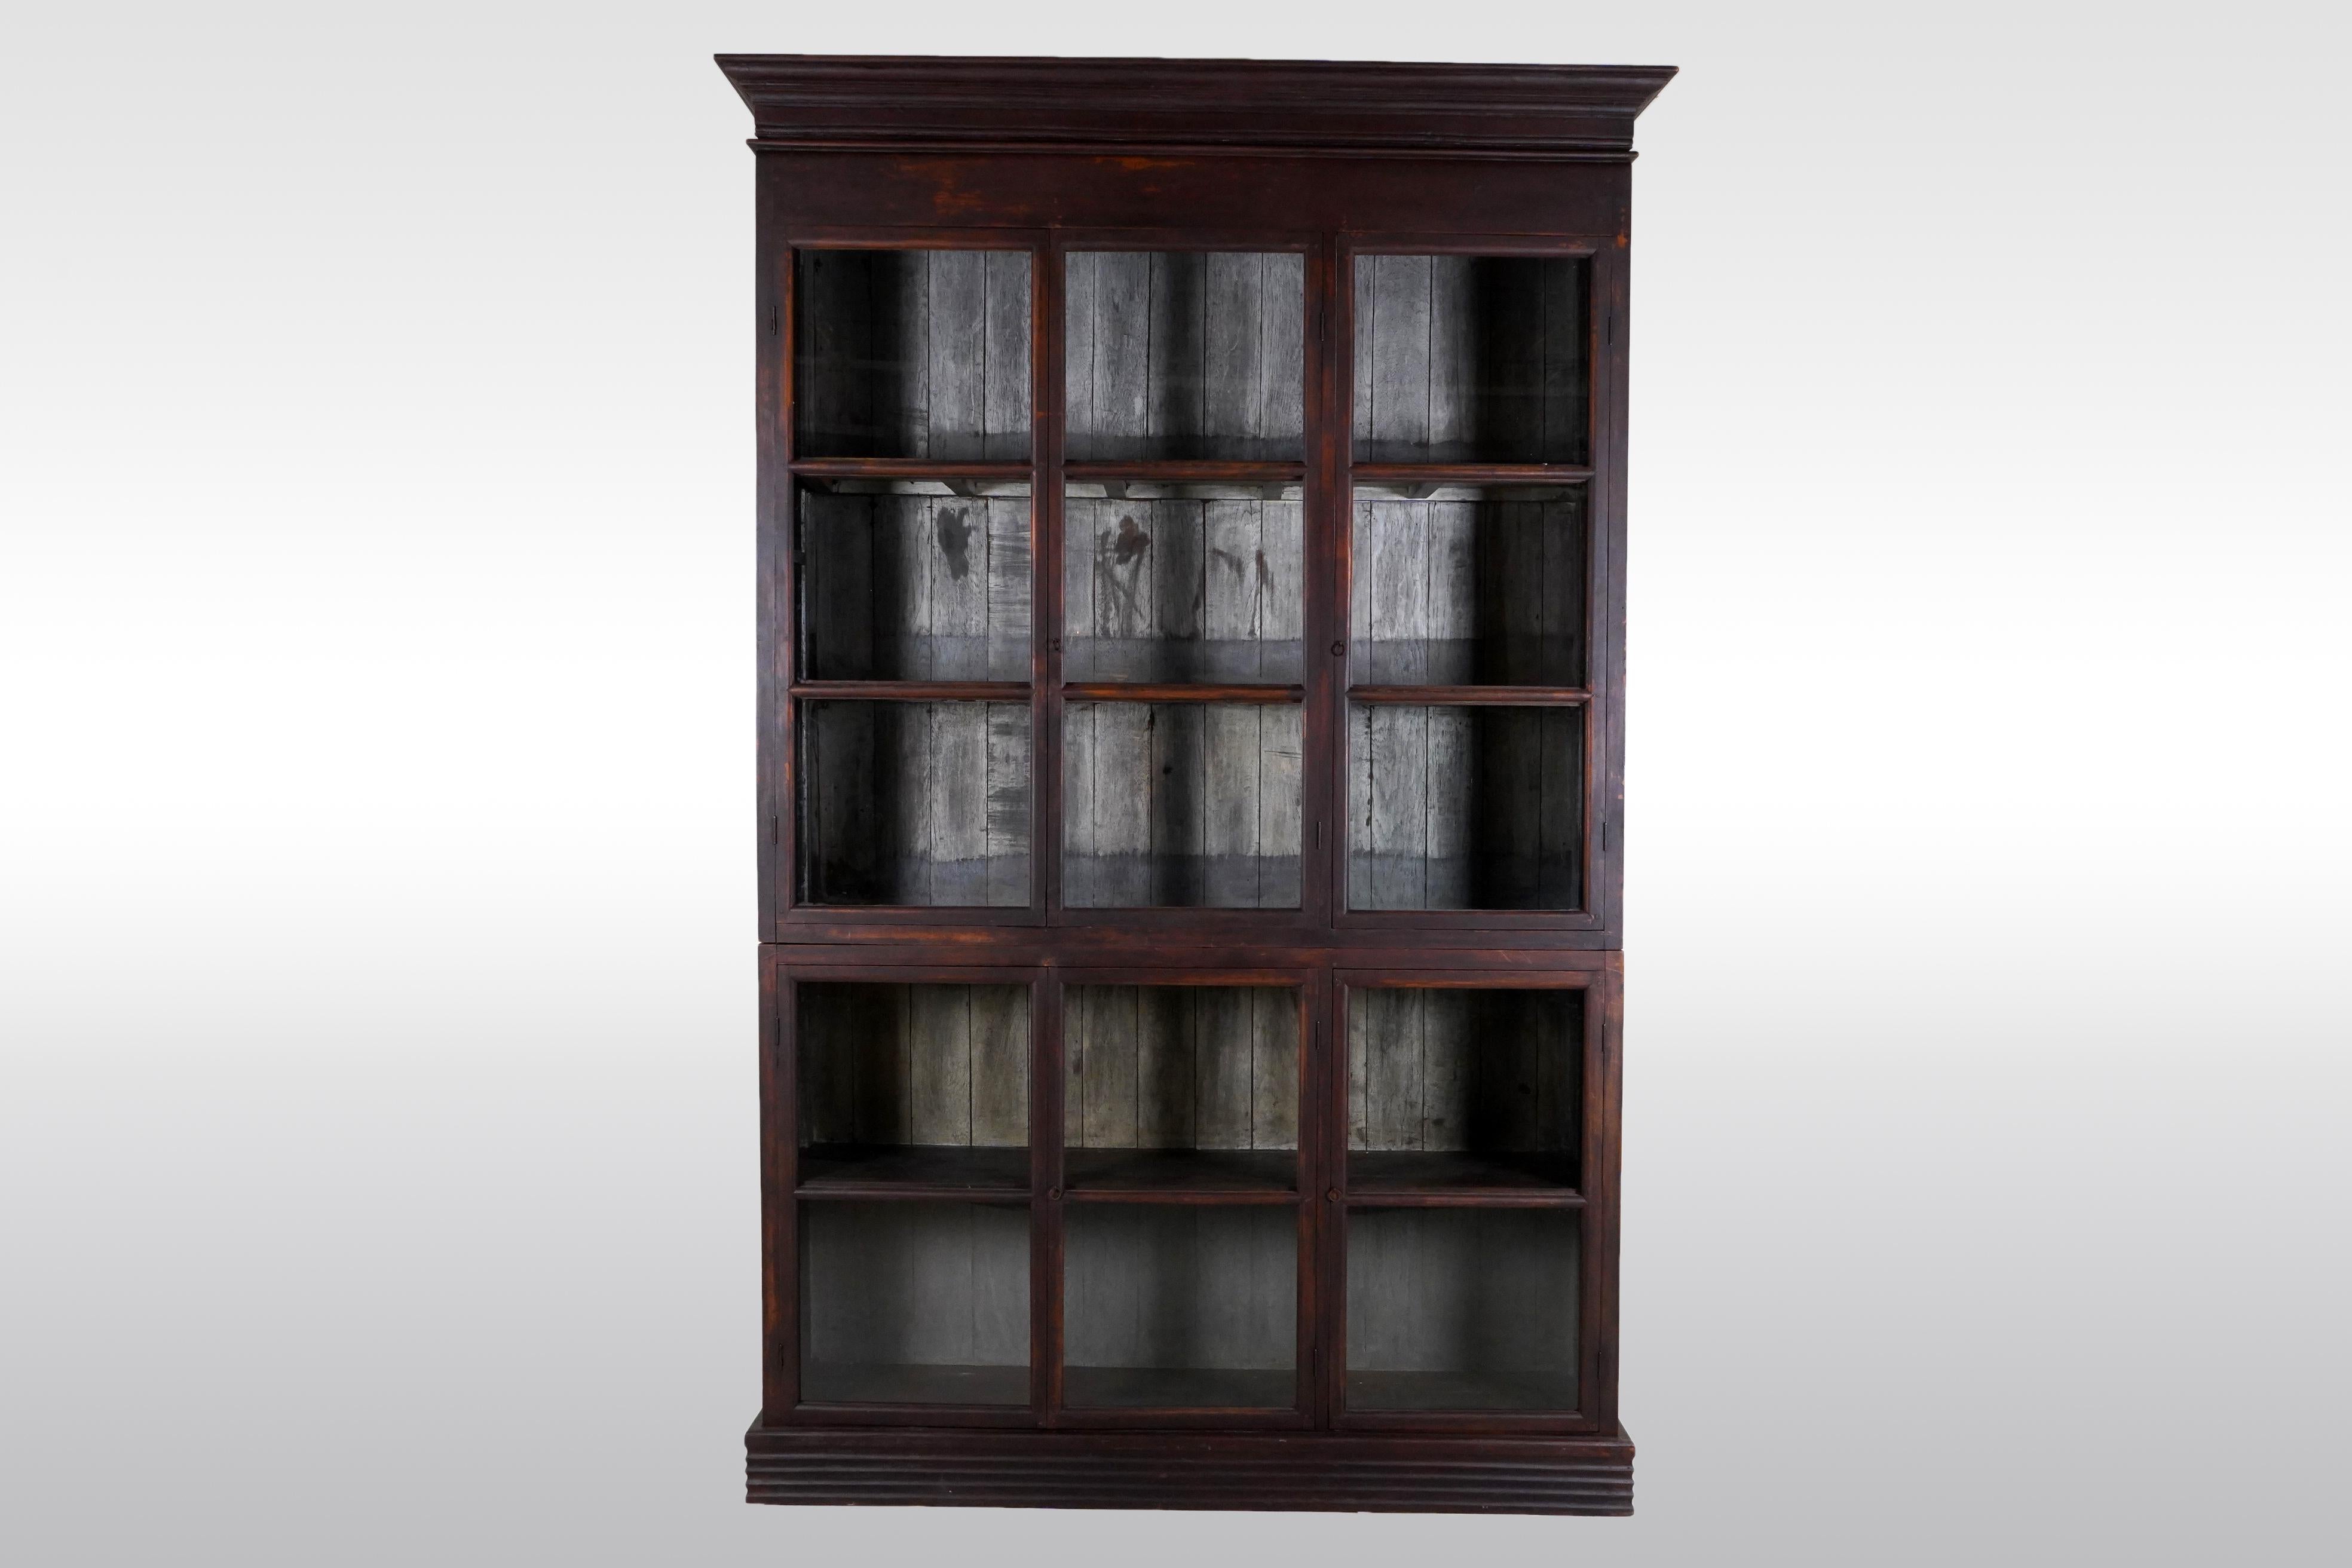 This monumental antique book cabinet was made from solid teak wood and dates to the early 1900's. During the time of the British Empire in India and Burma, much furniture was made in the Anglo-Indian style using native hardwoods and native